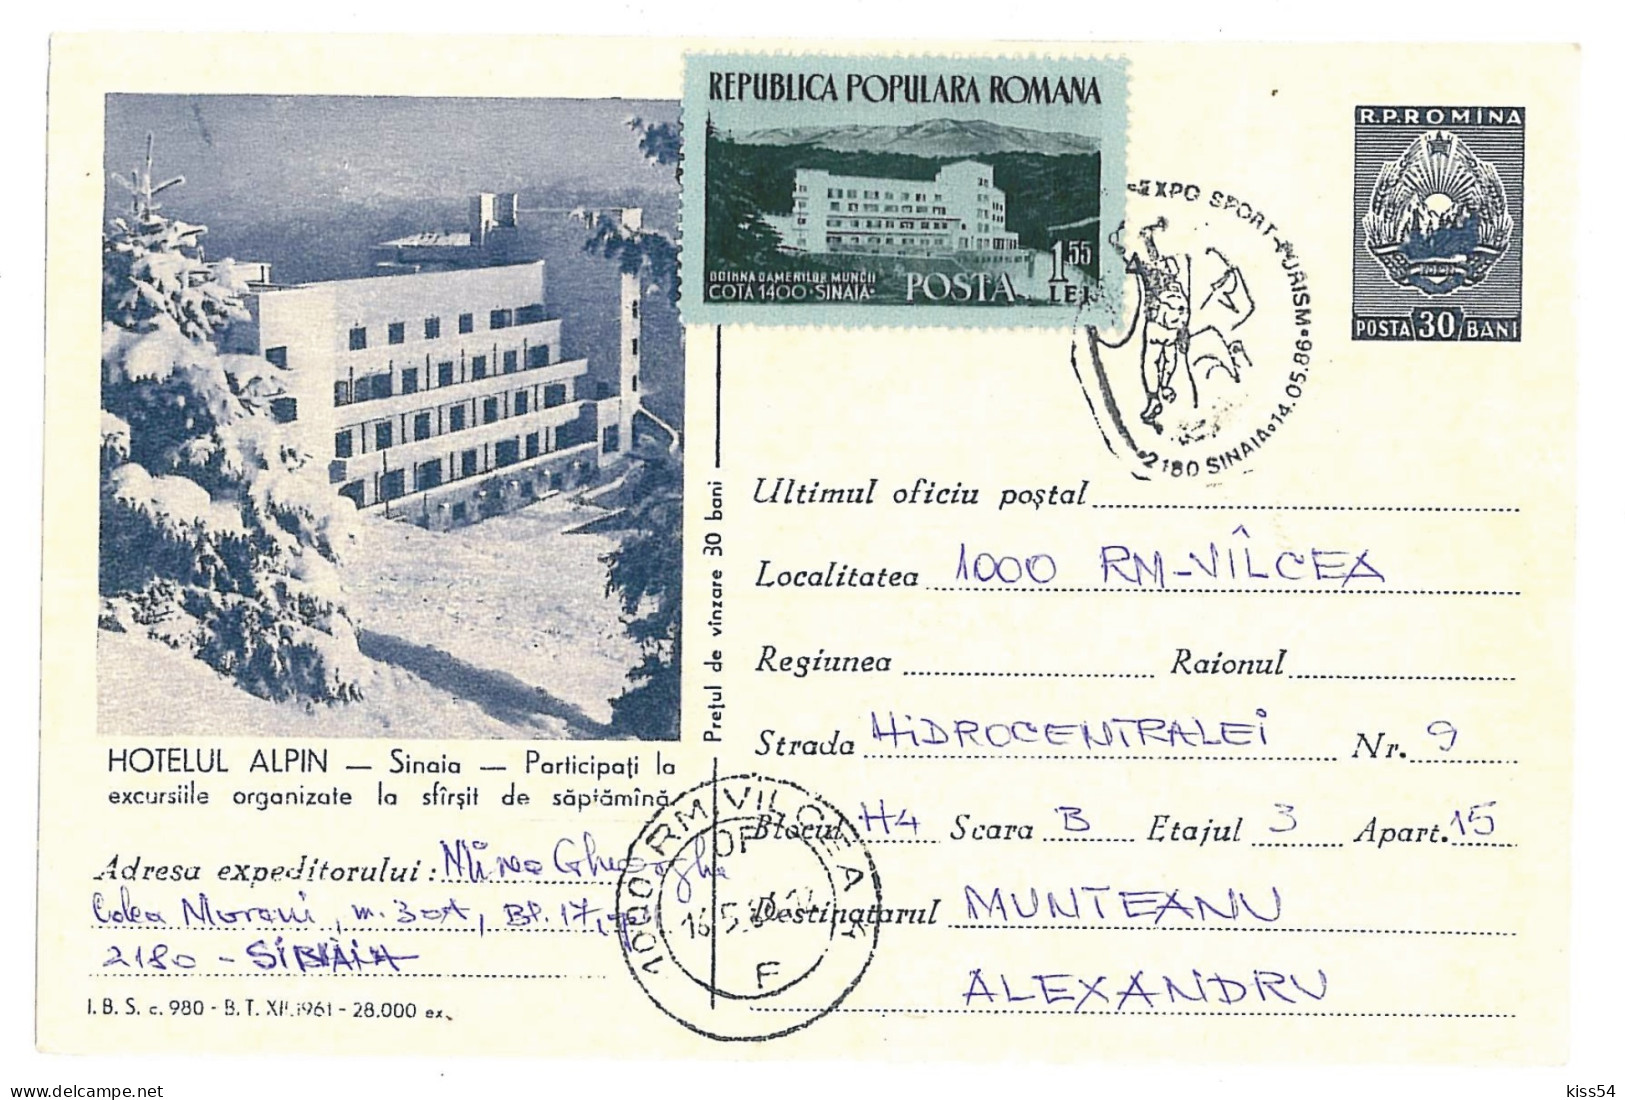 IP 61 - 0980d SINAIA, Hotel Alpin, Romania - Stationery - Used - 1961 - Entiers Postaux